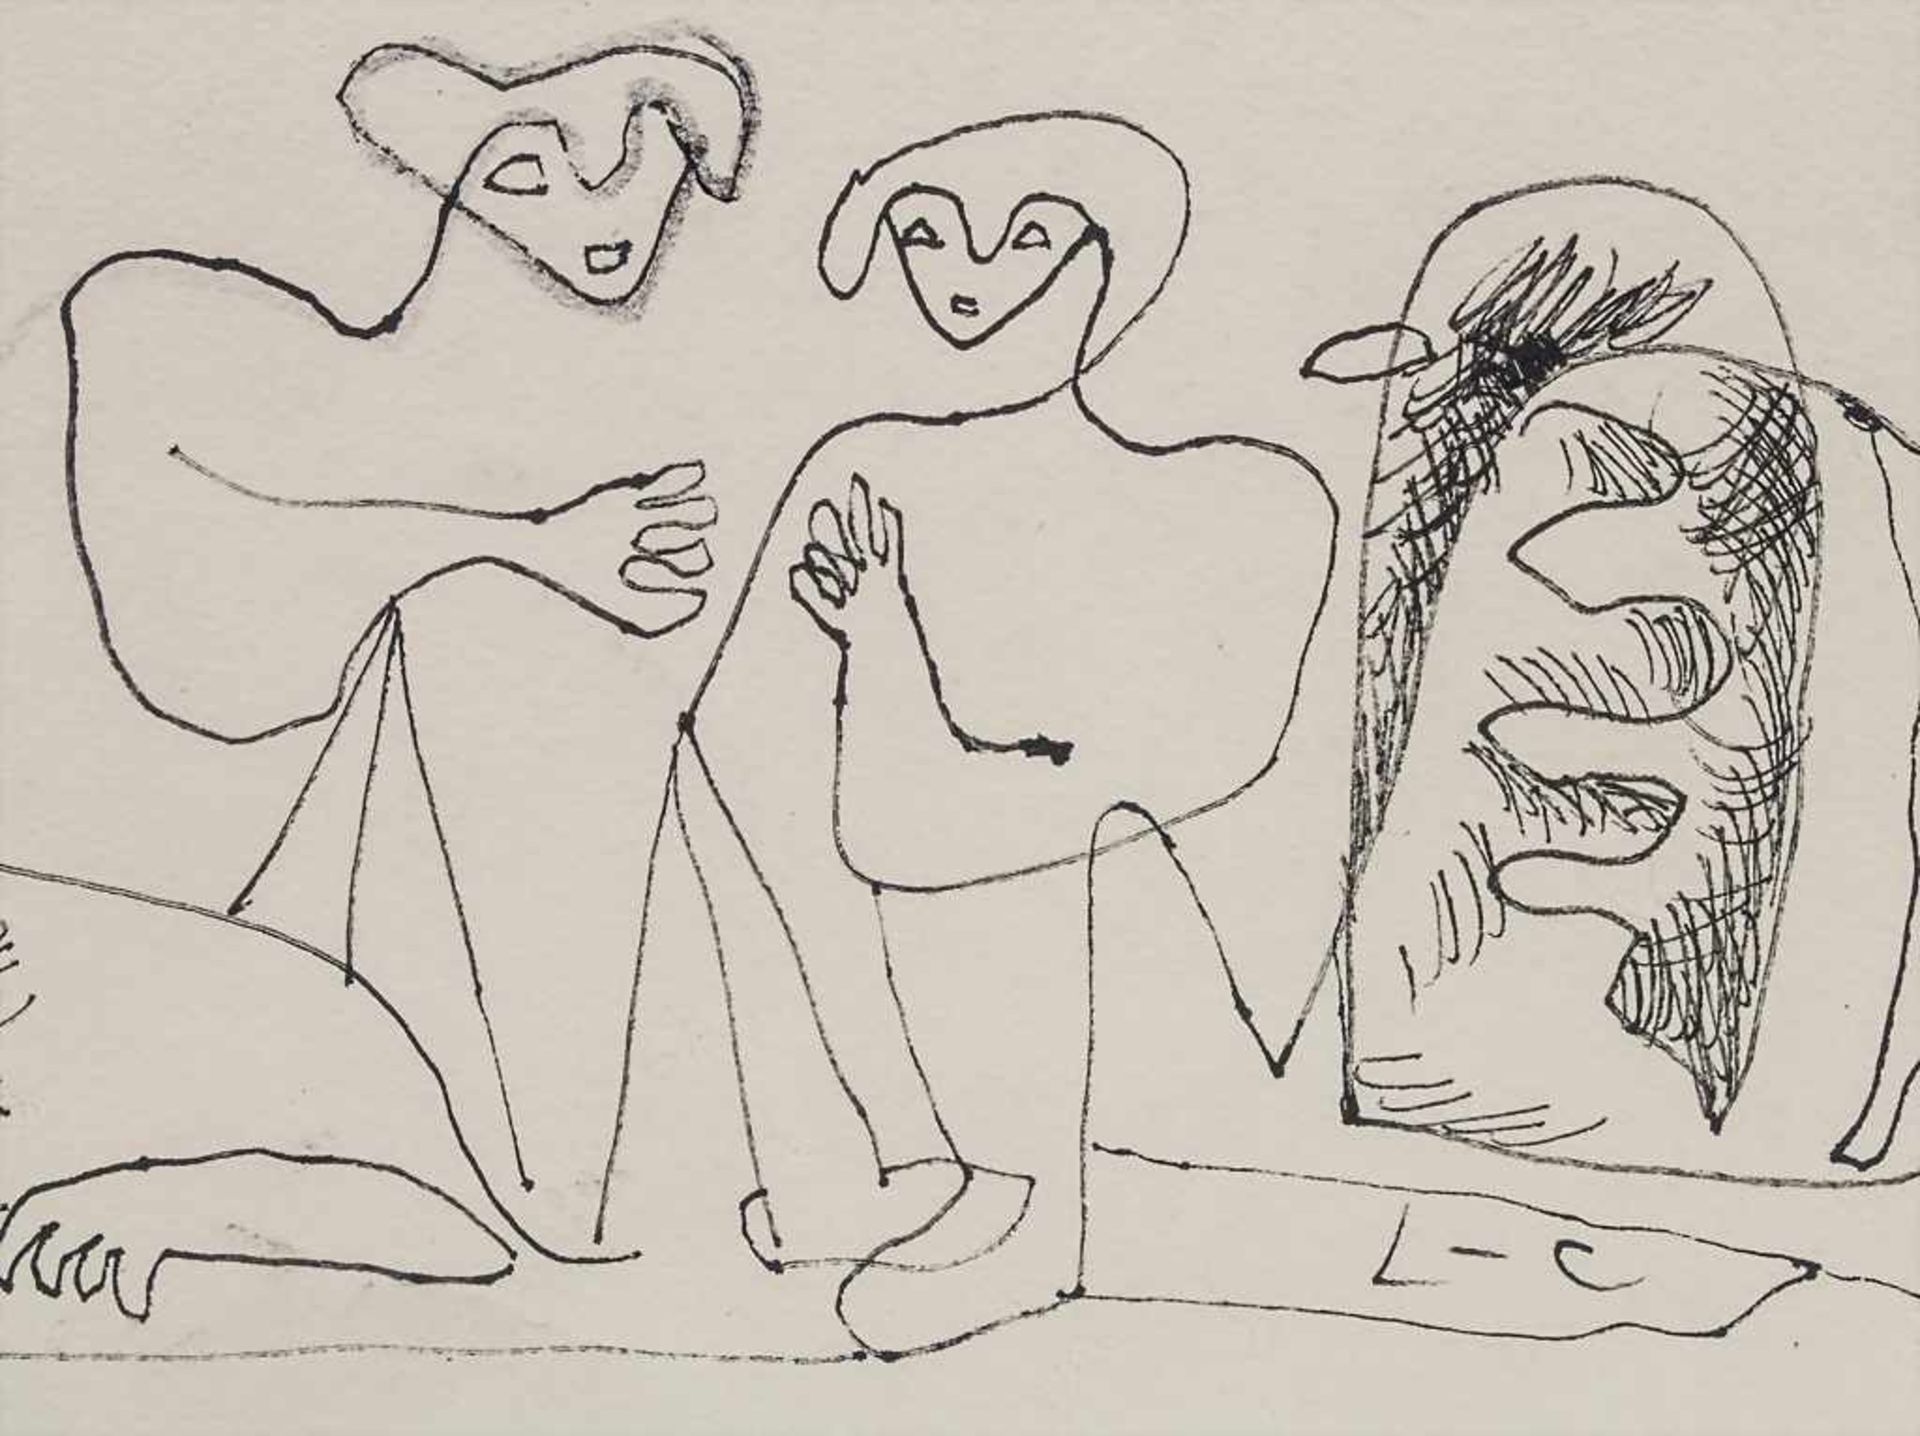 Le Corbusier (1887-1965) (Zuschreibung / Attributed), 'Figurengruppe' / 'A figural group'